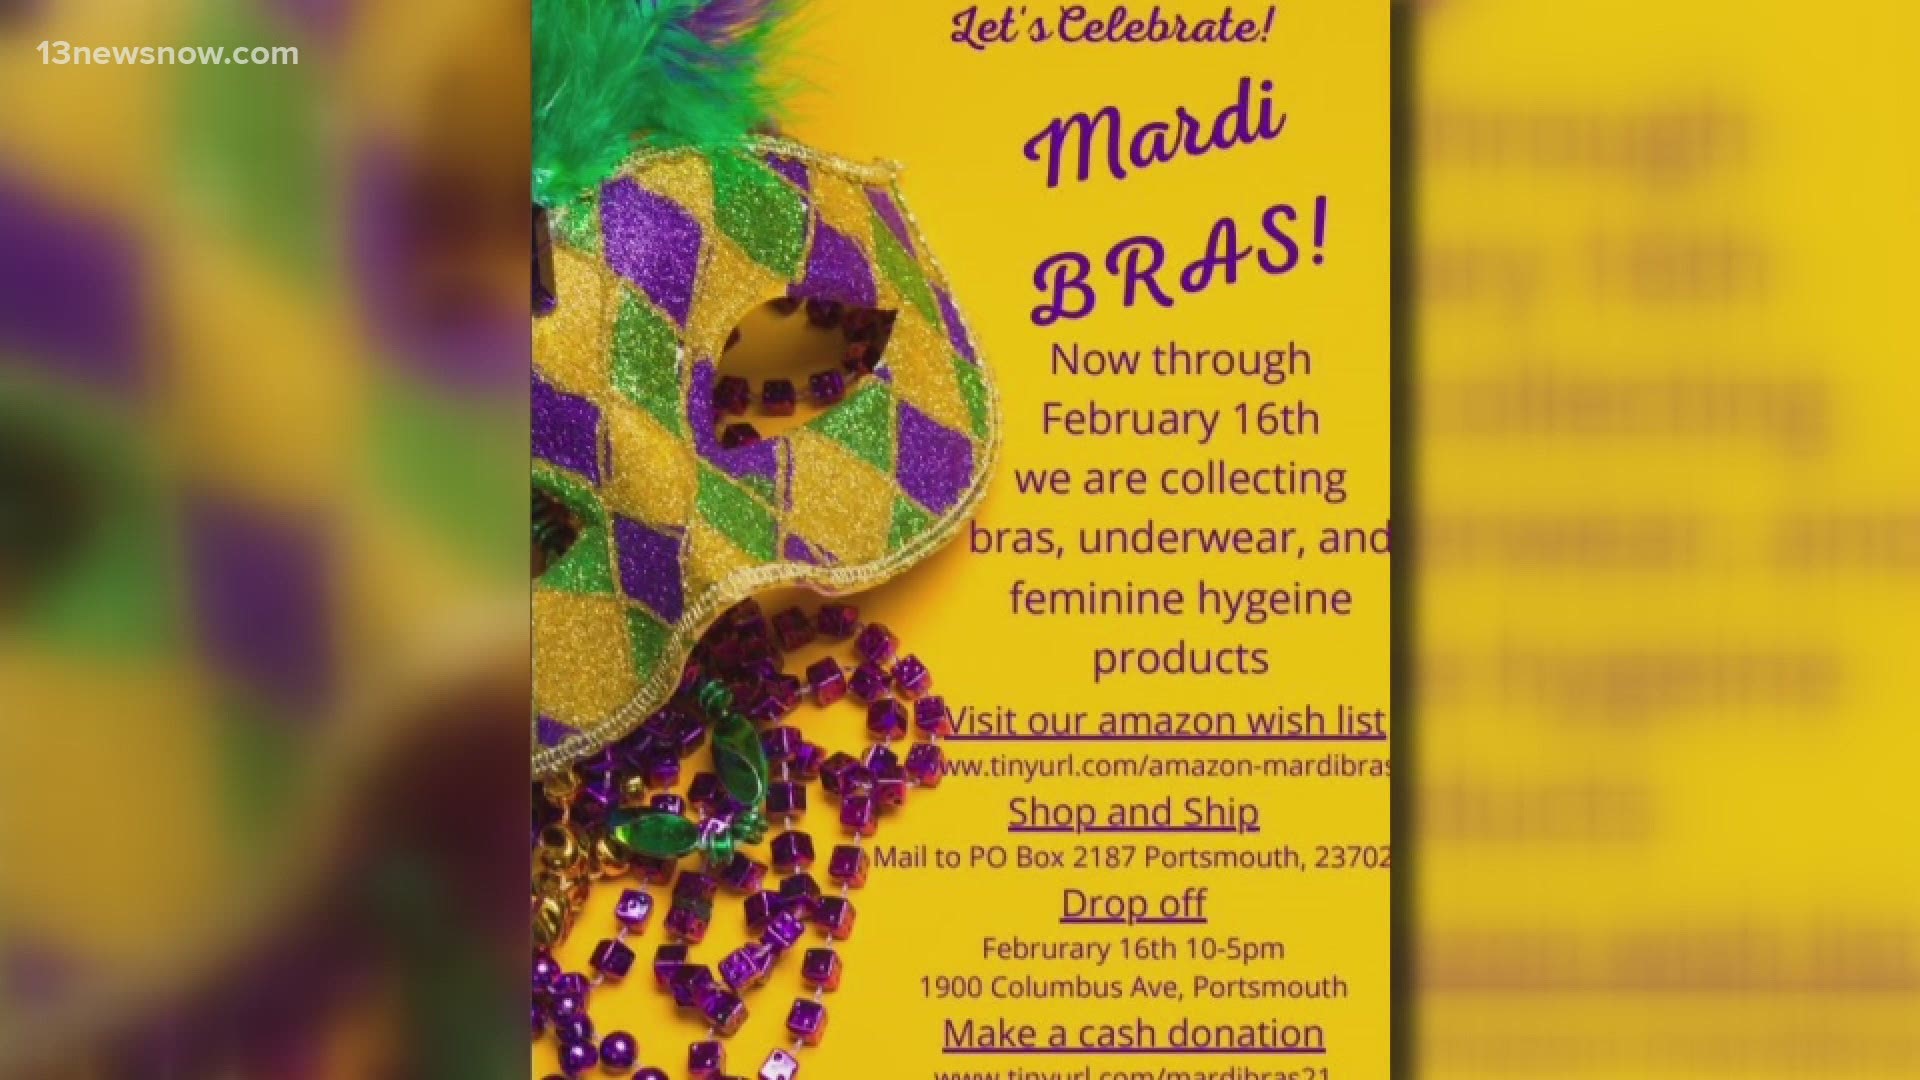 As the name suggests, they're asking the public to donate new undergarments to women who've left abusive homes without the necessary clothing.